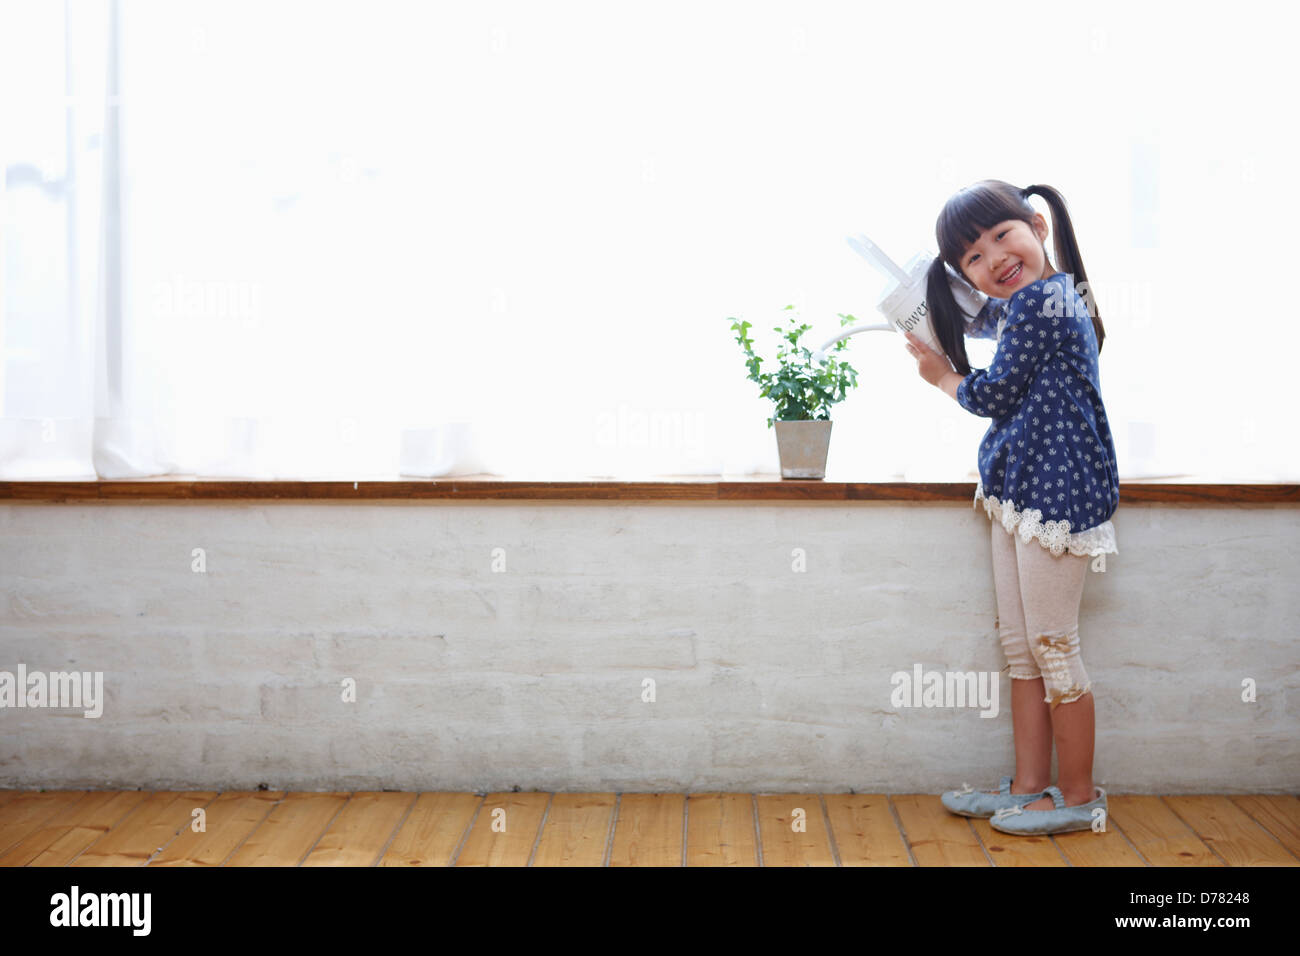 a girl watering a plant in a vase Stock Photo